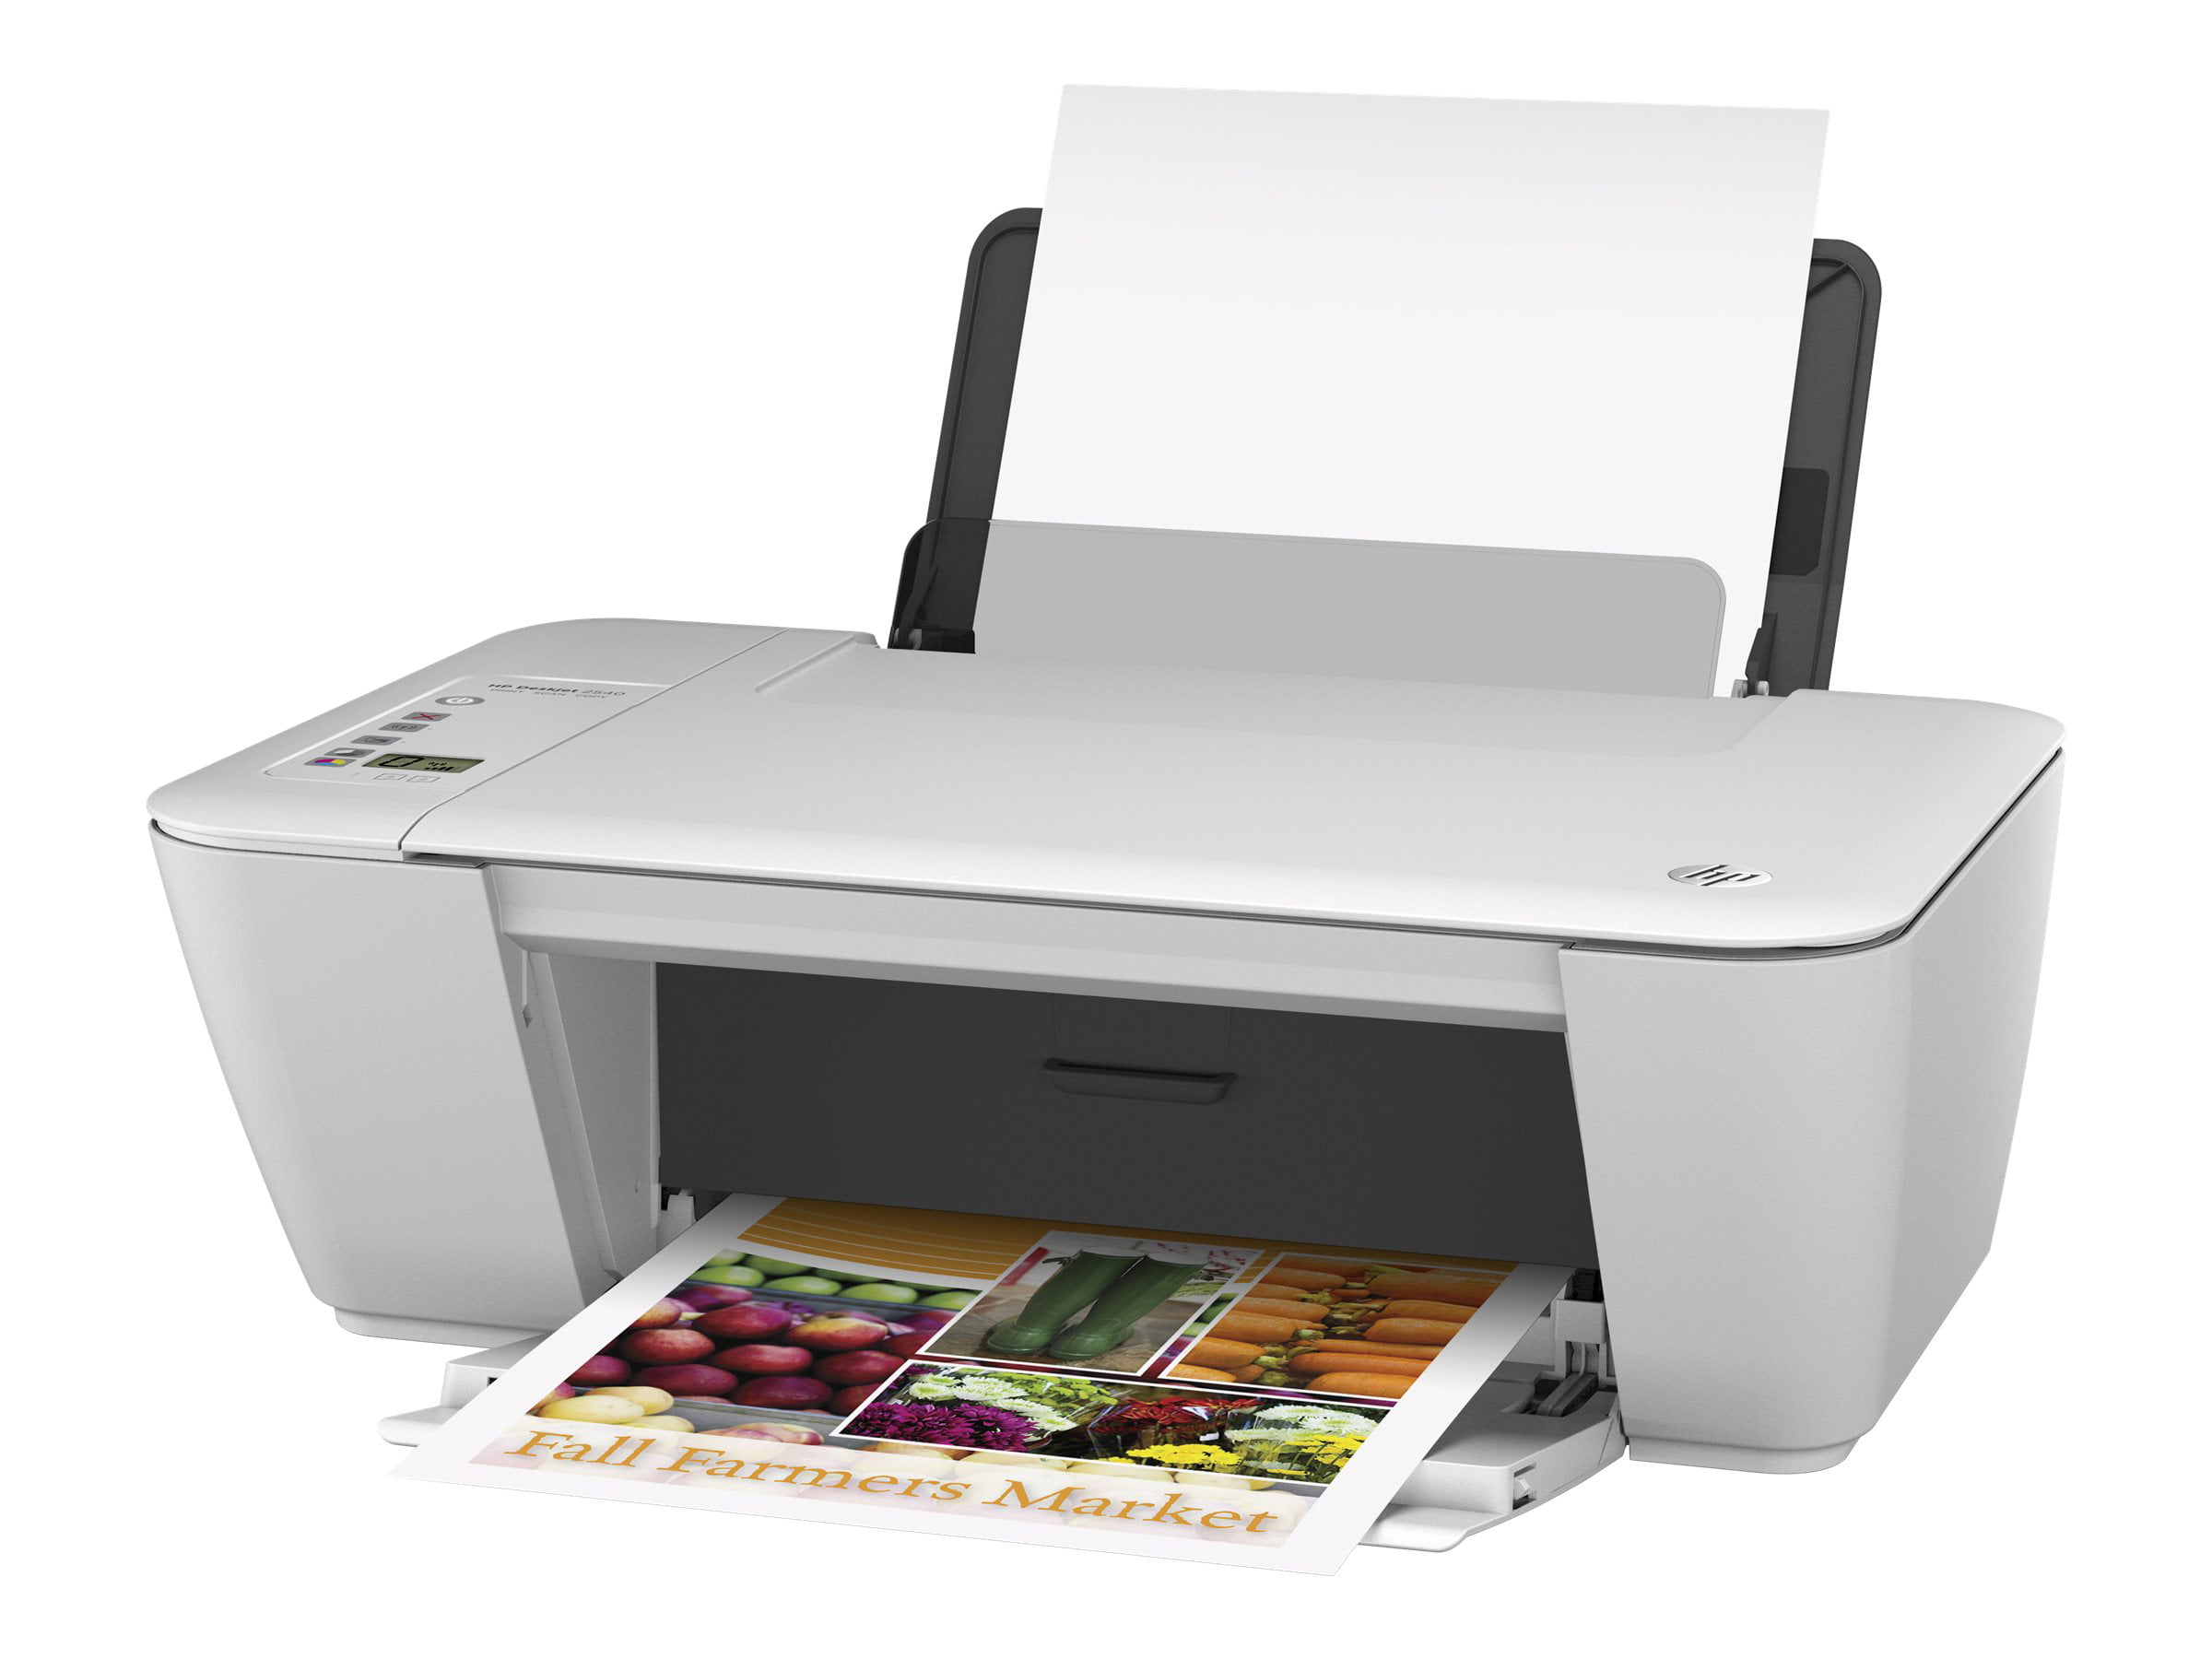 HP Deskjet 2541 All-in-One - Multifunction printer - color - ink-jet - 8.5 in x 11.7 in - A4/Legal (media) - up to 4.5 ppm (copying) - up to 7 ppm (